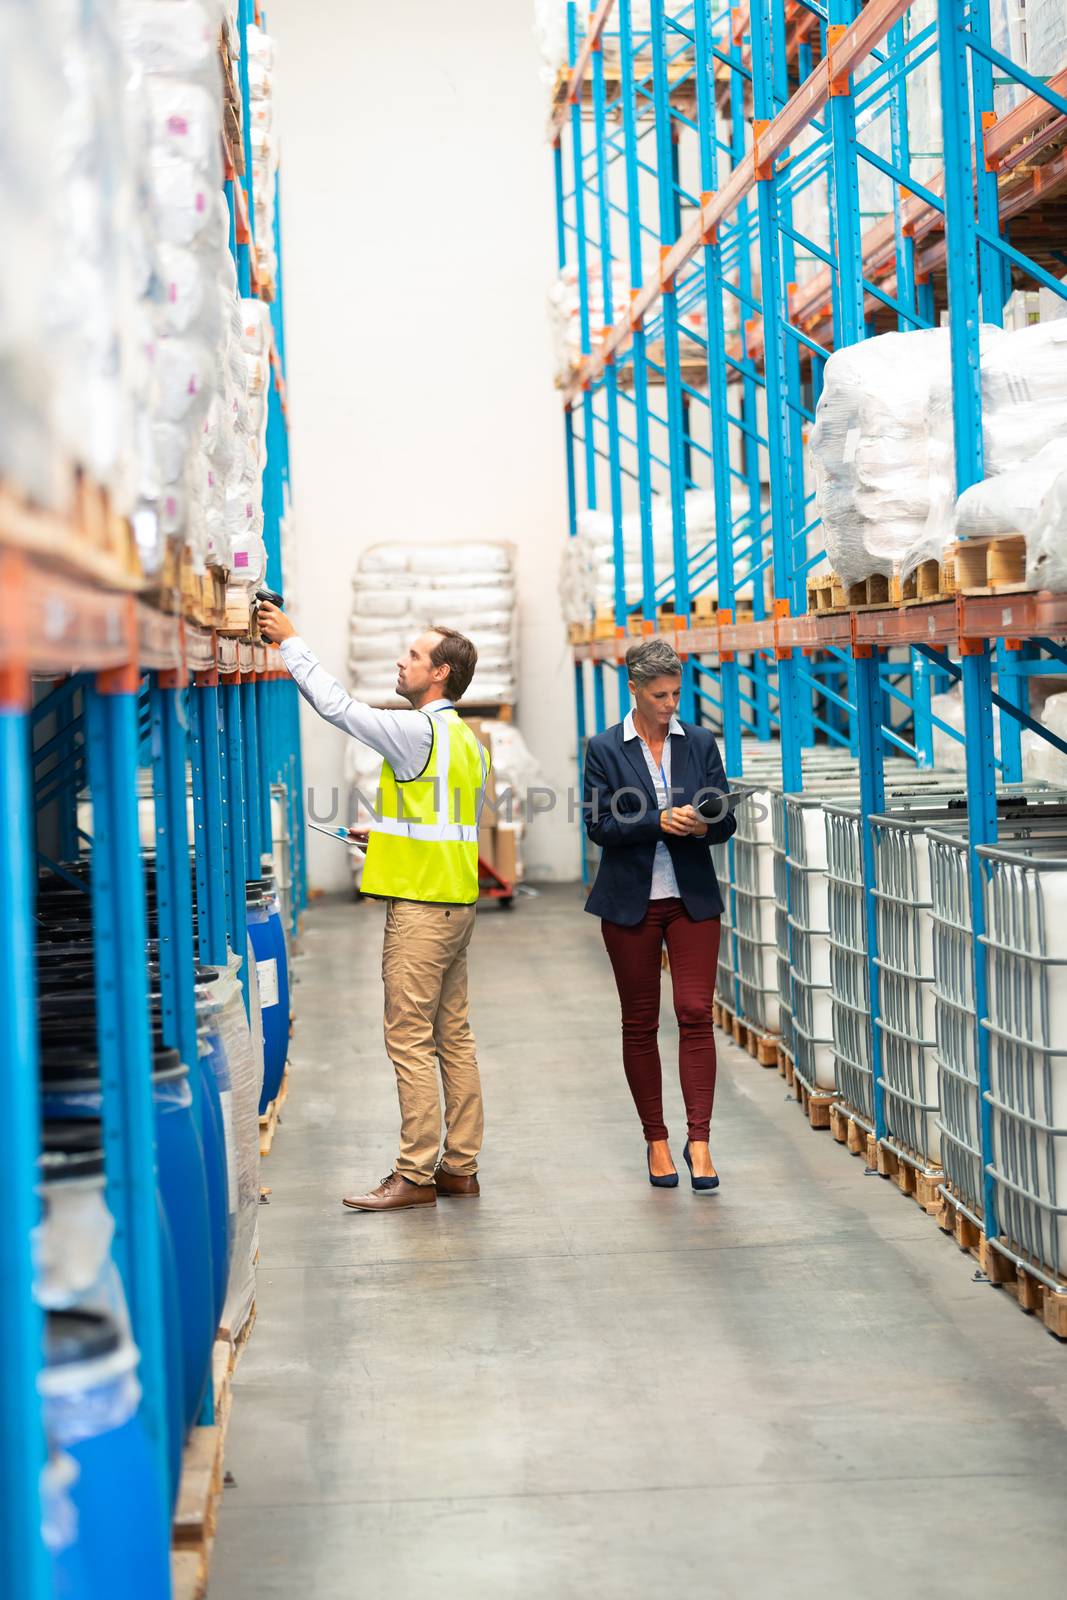 Side view of handsome mature Caucasian male worker scanning package with barcode scanner in modern warehouse. Caucasian woman is walking with clipboard in aisle behind male worker. This is a freight transportation and distribution warehouse. Industrial and industrial workers concept